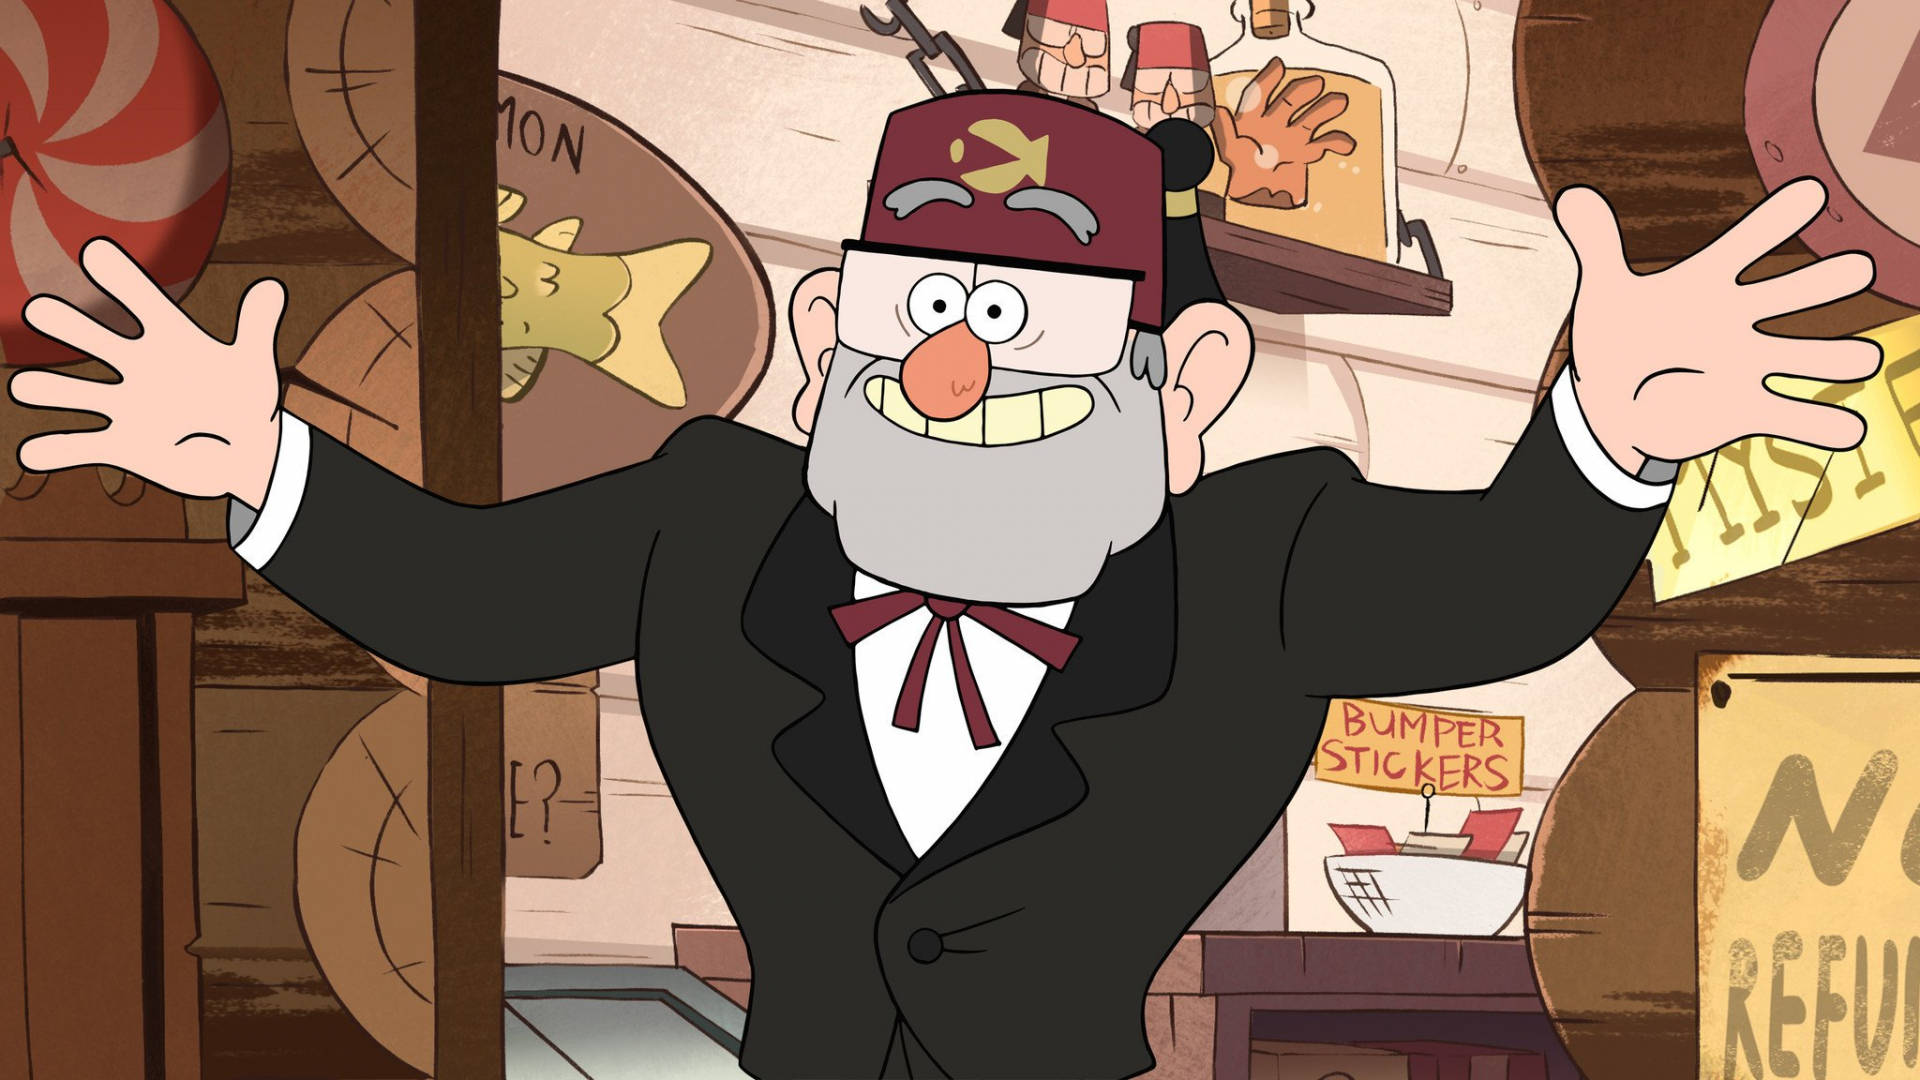 Grunkle Stan In Store